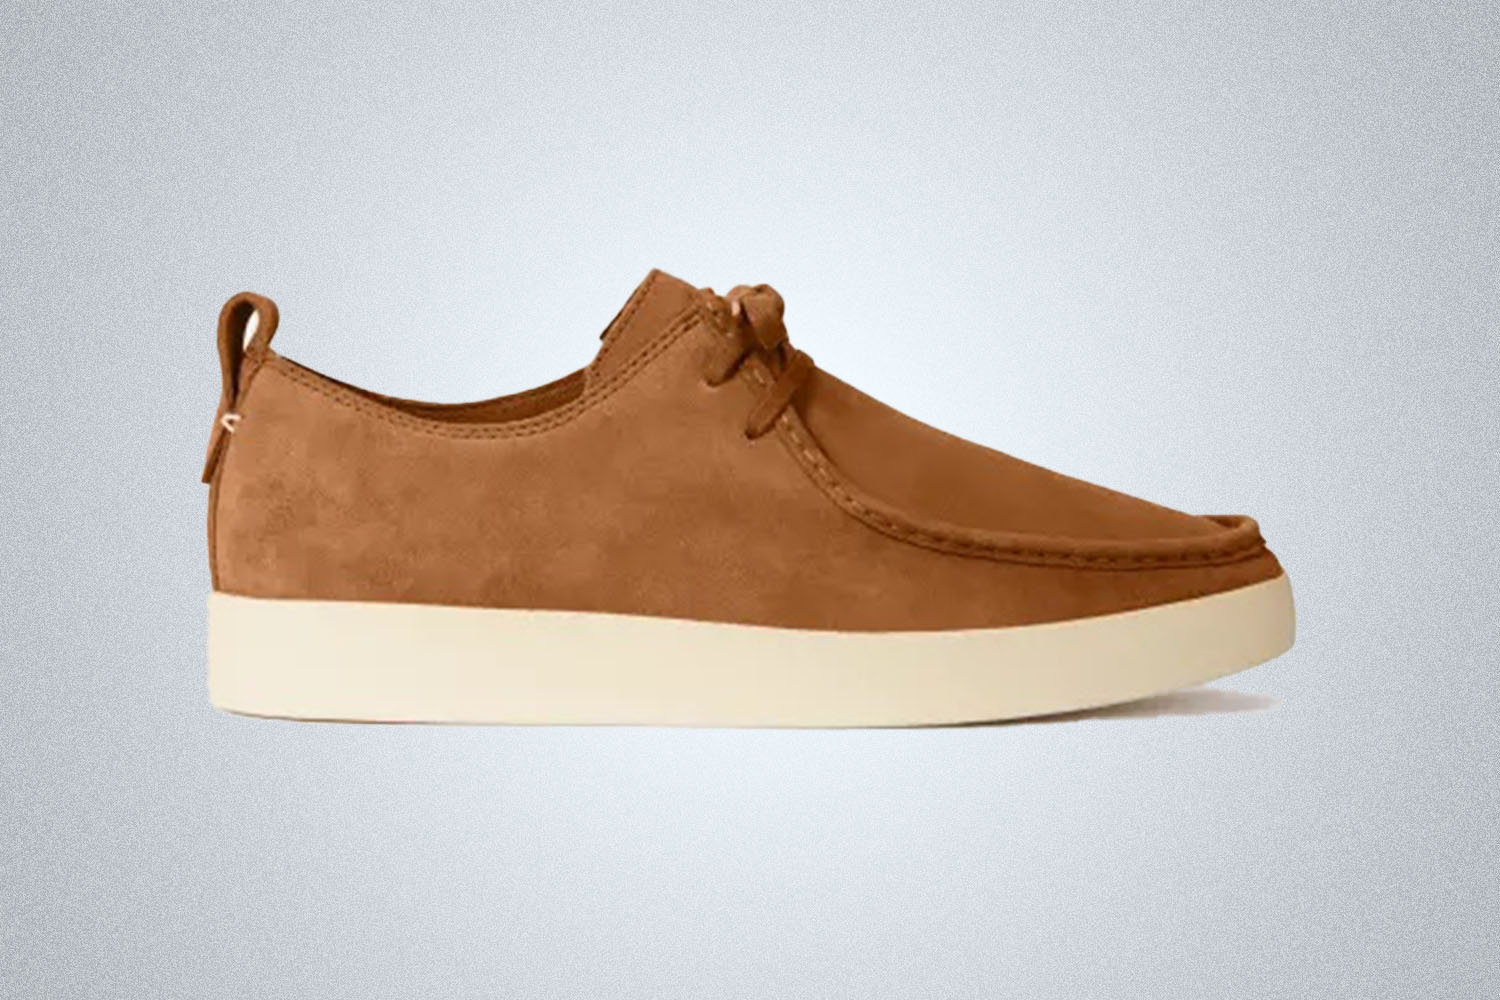 a beige Desert Shoe from Everlane on a grey background